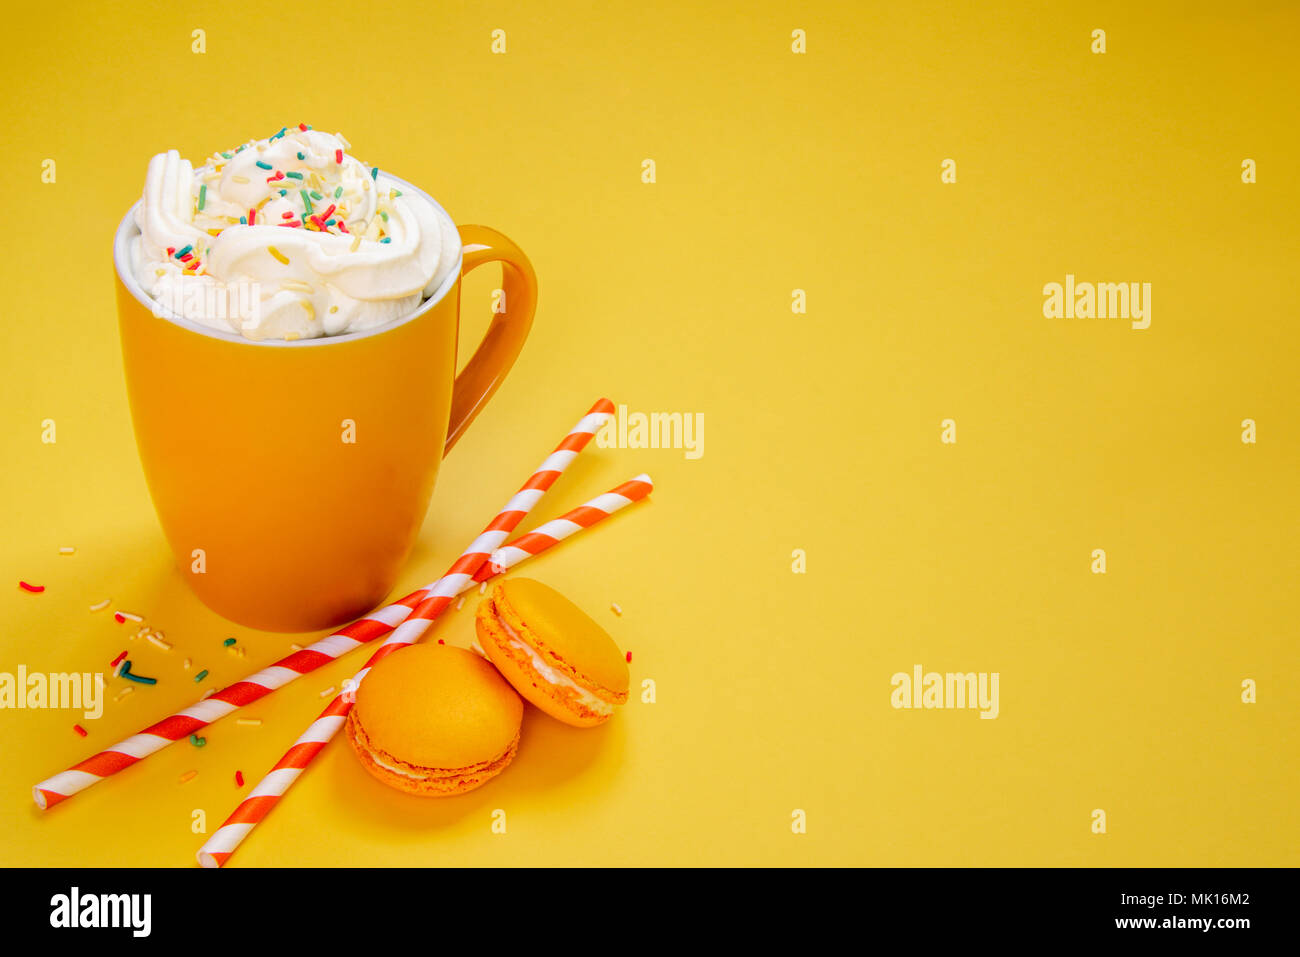 Close up of yellow coffee cup, straws and french macaroons over yellow background. Stock Photo